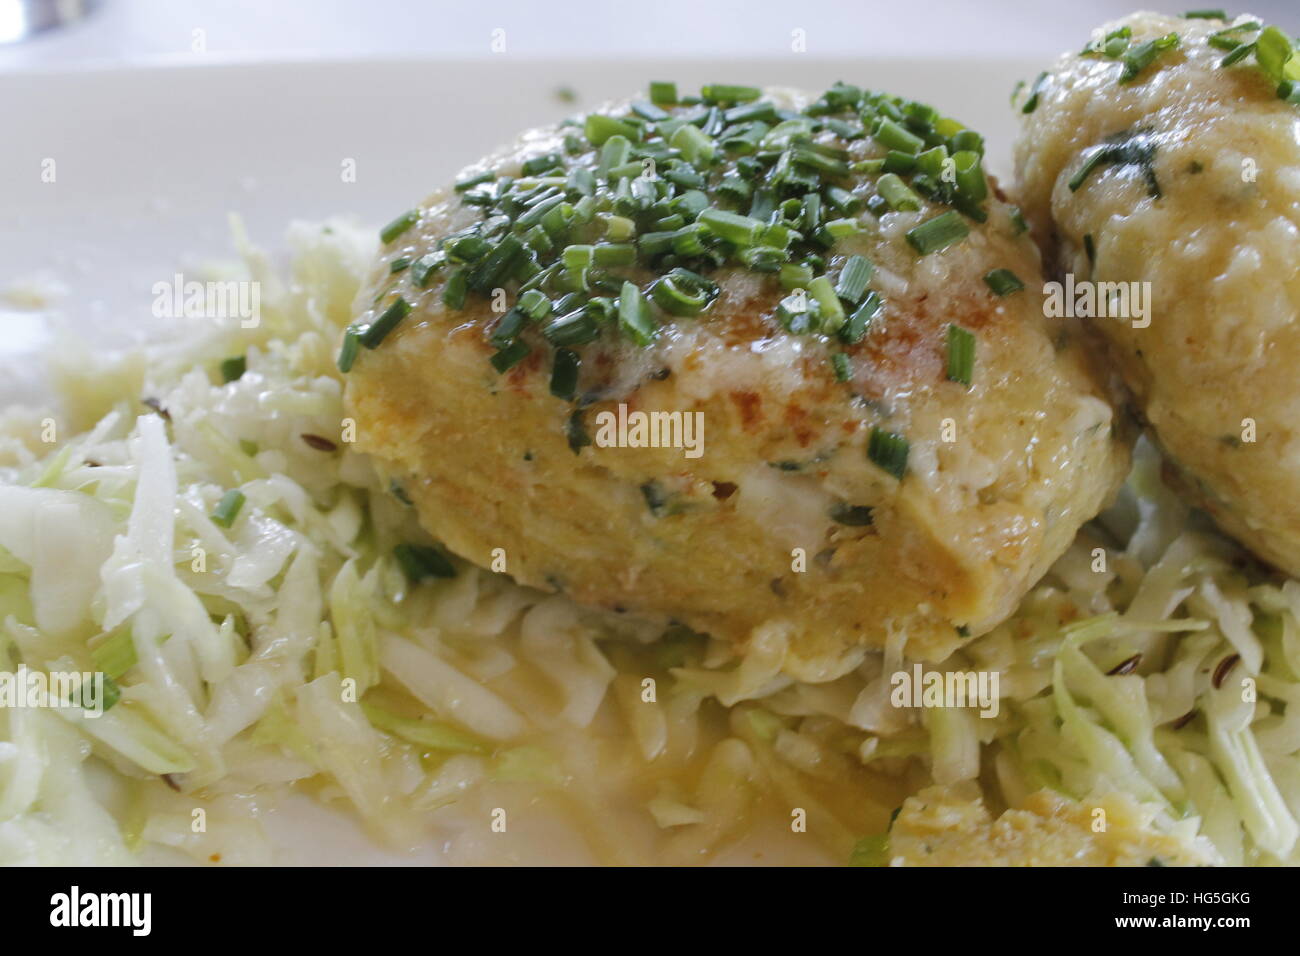 Tyrolean traditional dish, knodel or canederli with parsley Stock Photo